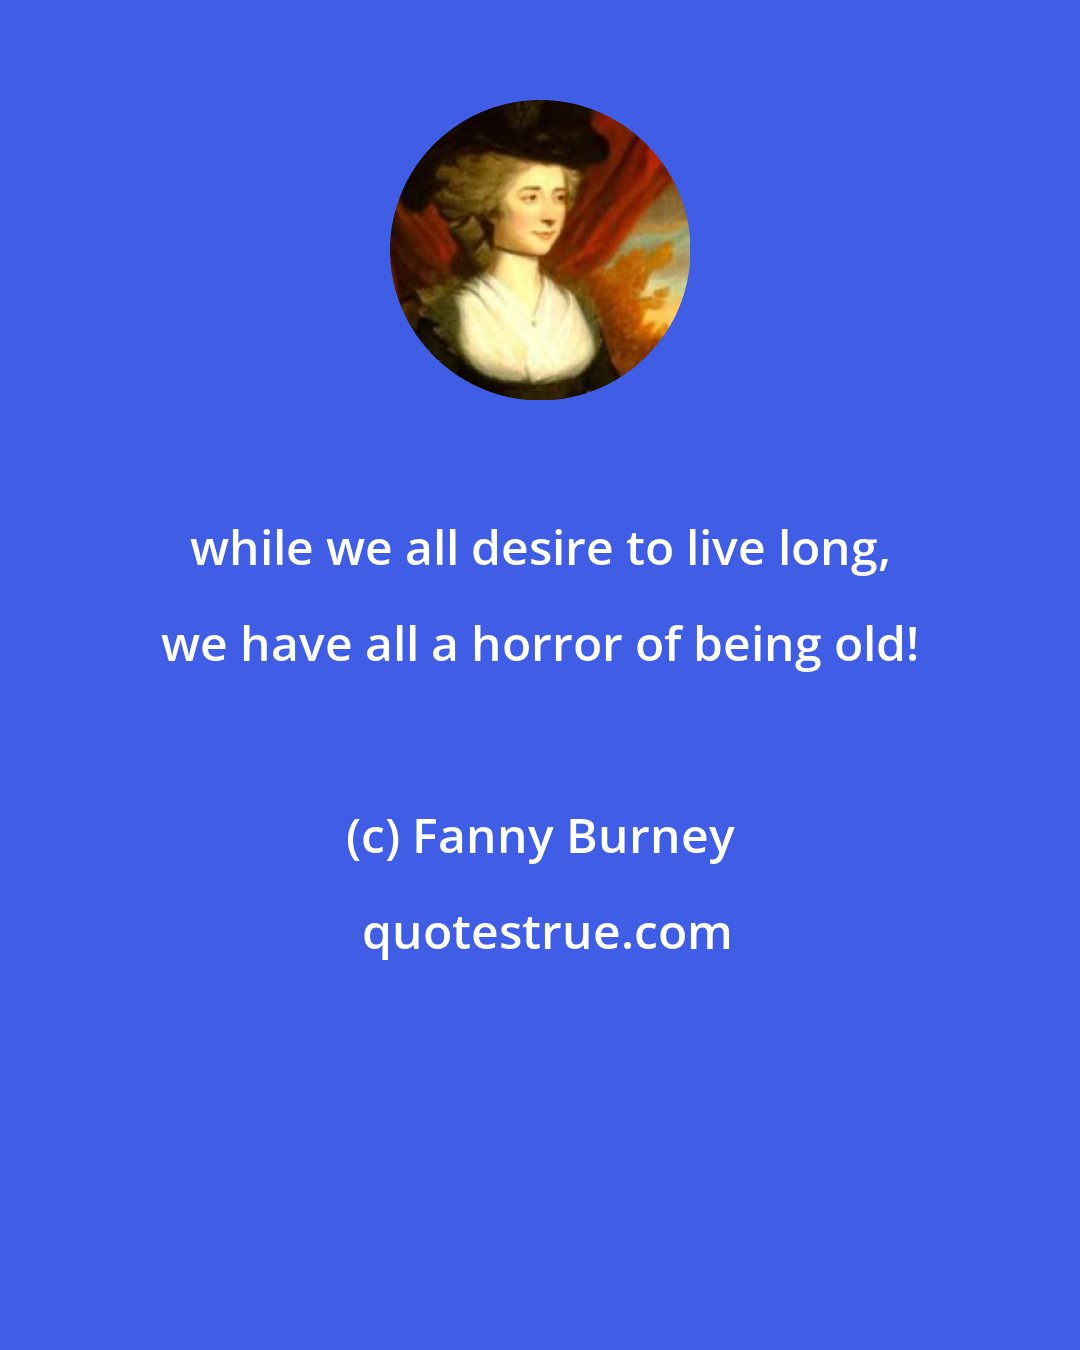 Fanny Burney: while we all desire to live long, we have all a horror of being old!